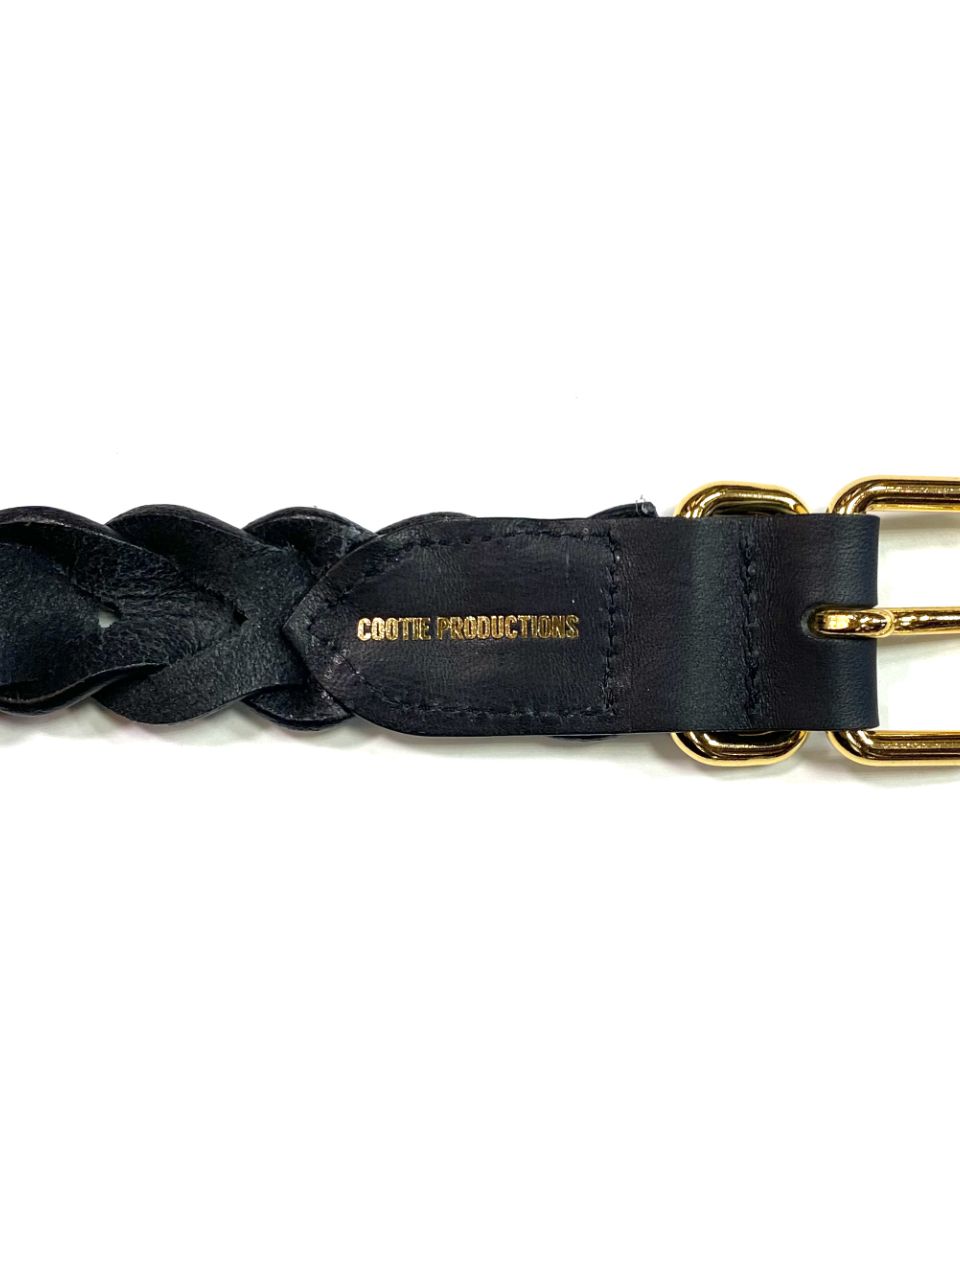 COOTIE PRODUCTIONS - Leather Braid Belt (SILVER) / レザー メッシュ 